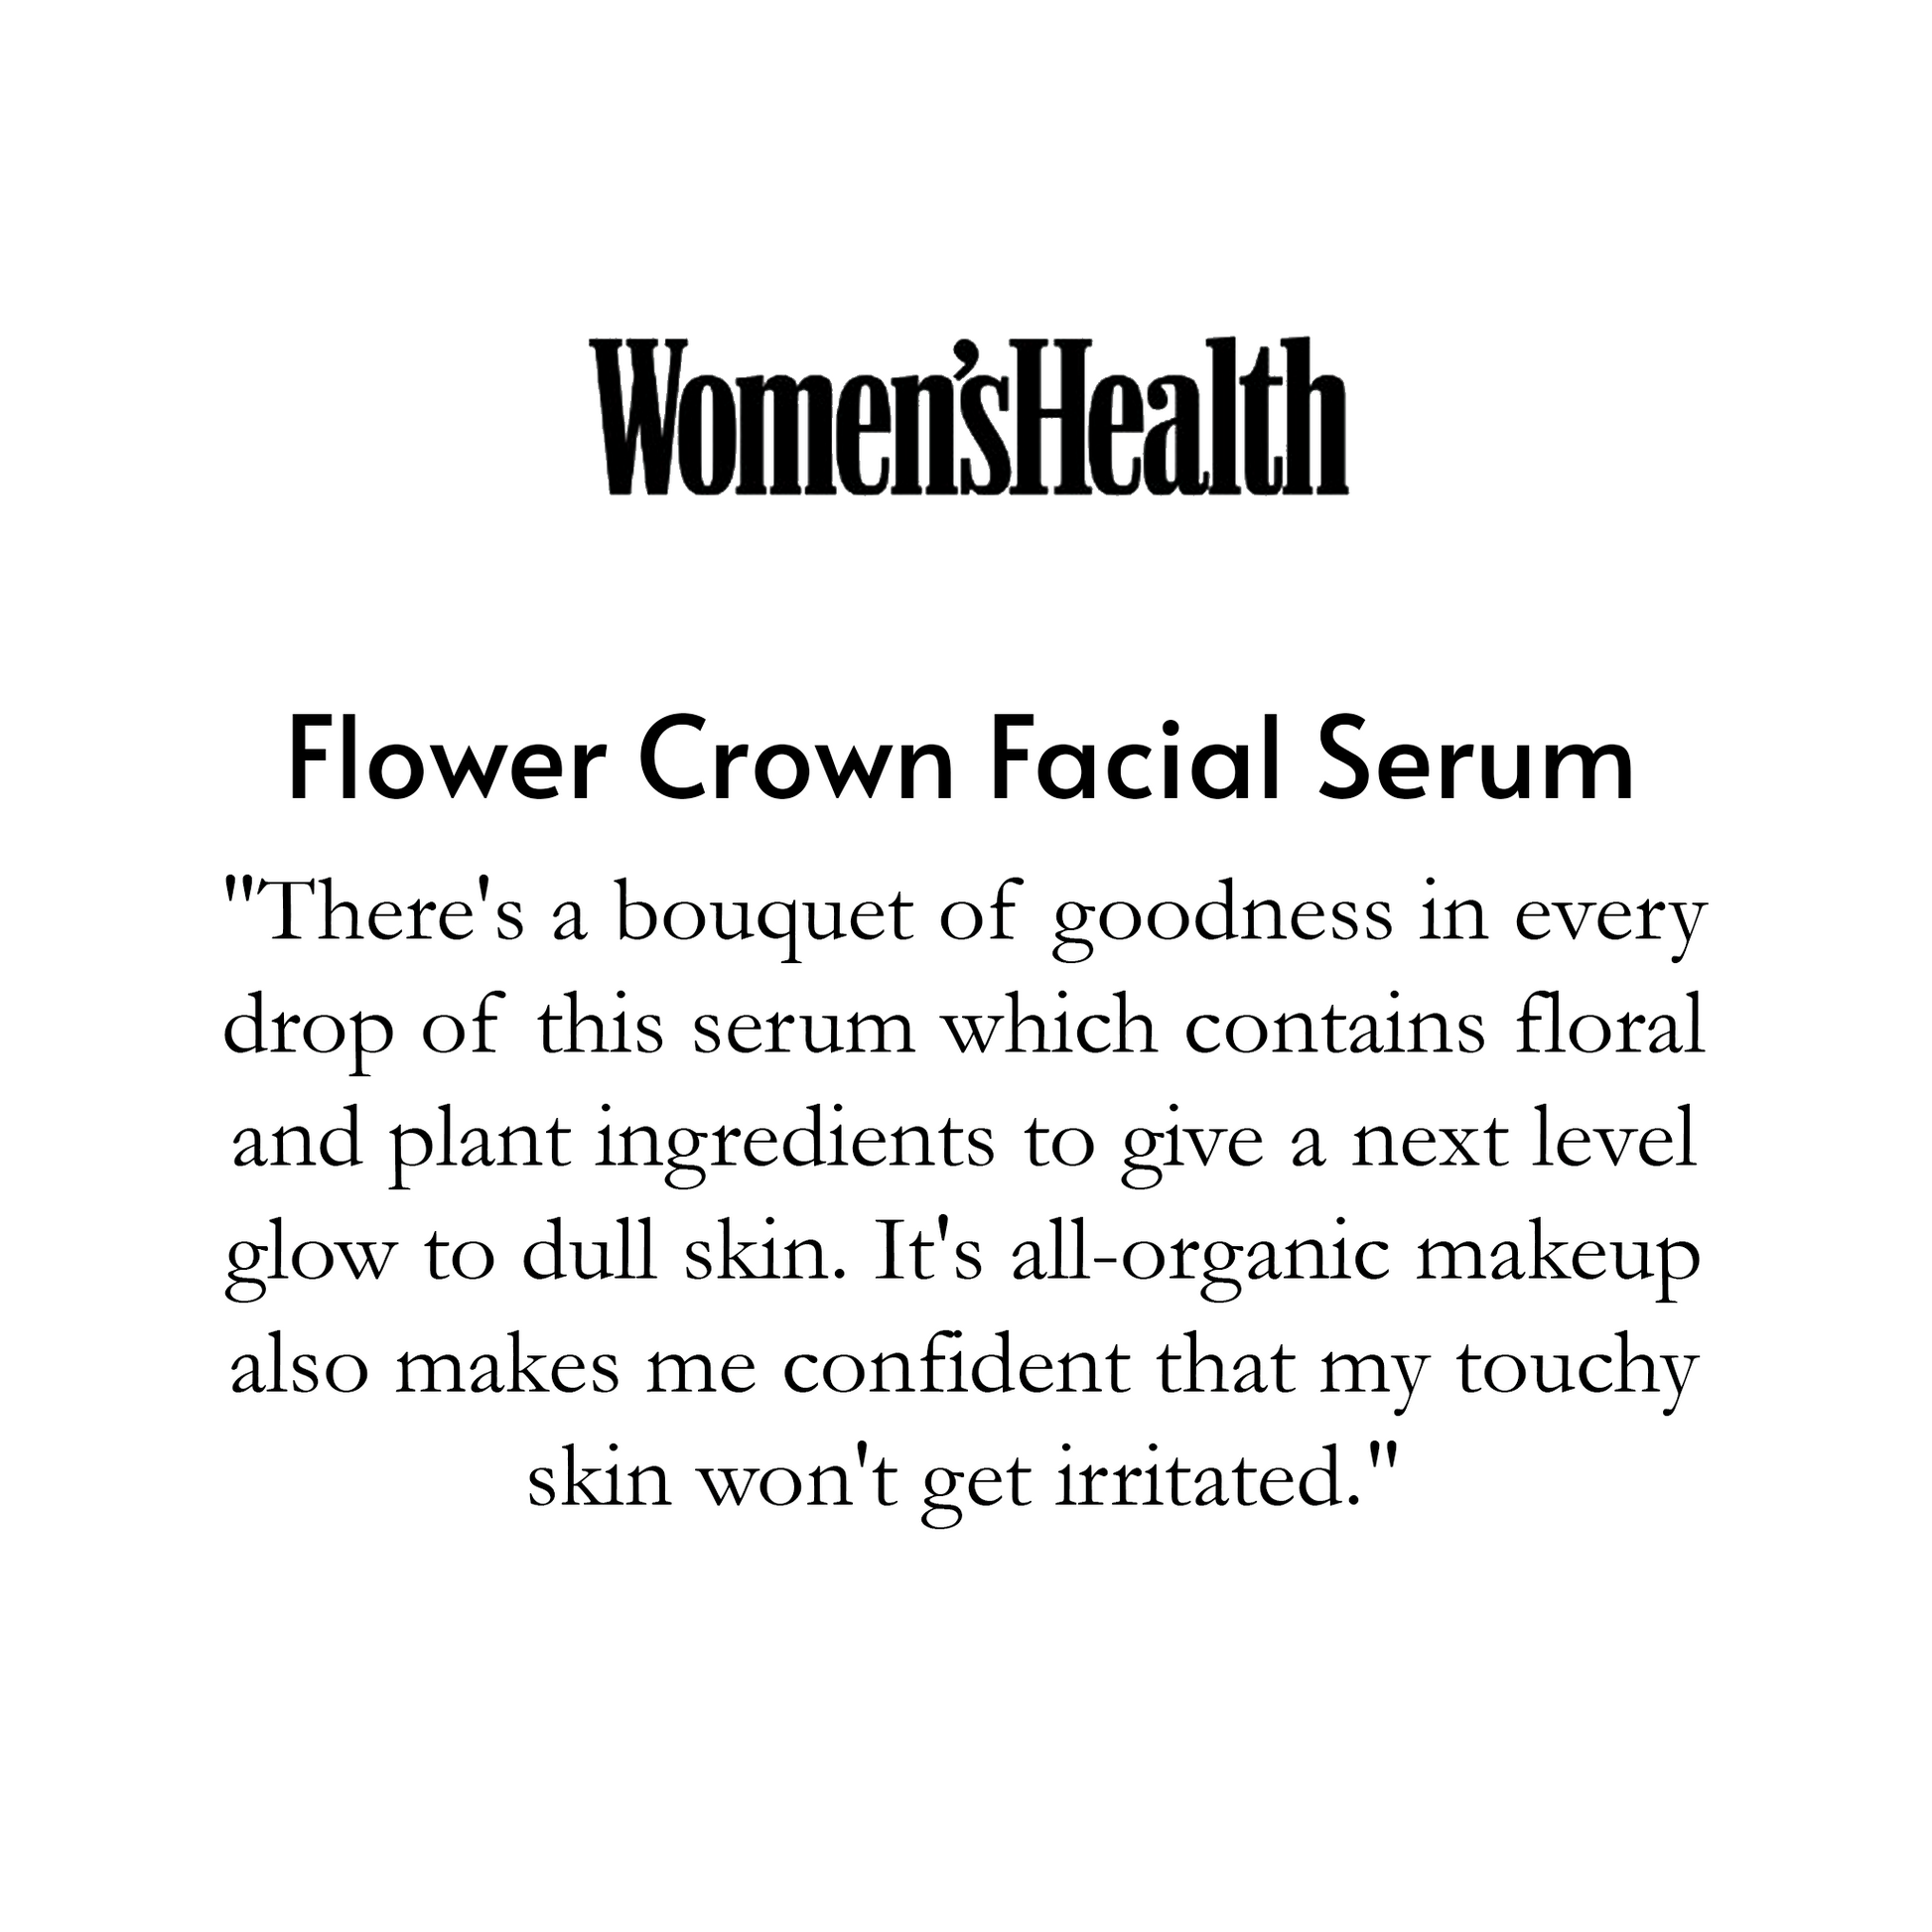 Women's Health is above Flower Crown Facial Serum and says " There's a bouquet of goodness in every drop of this serum which contains floral and plant ingredients to give a next level glow to dull skin. It's all-organic makeup also makes me confident that my touchy skin won't get irritated." 